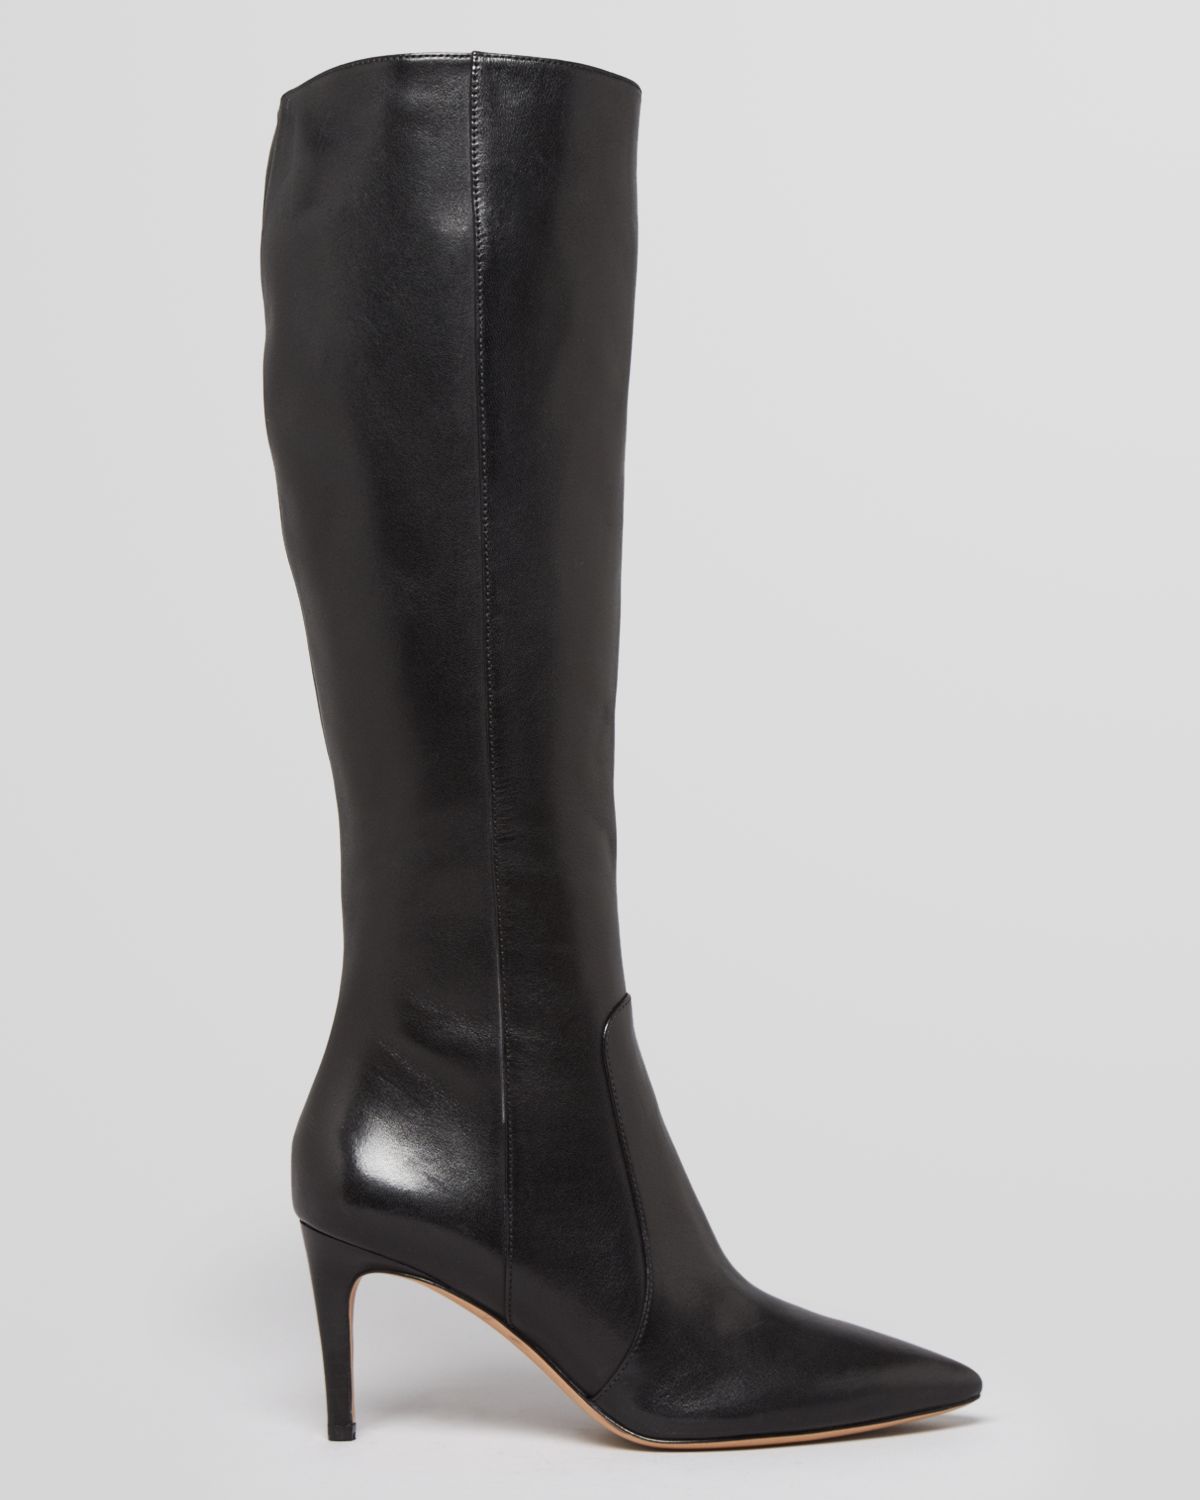 Lyst - Via Spiga Pointed Toe Tall Dress Boots Dacia High Heel in Brown